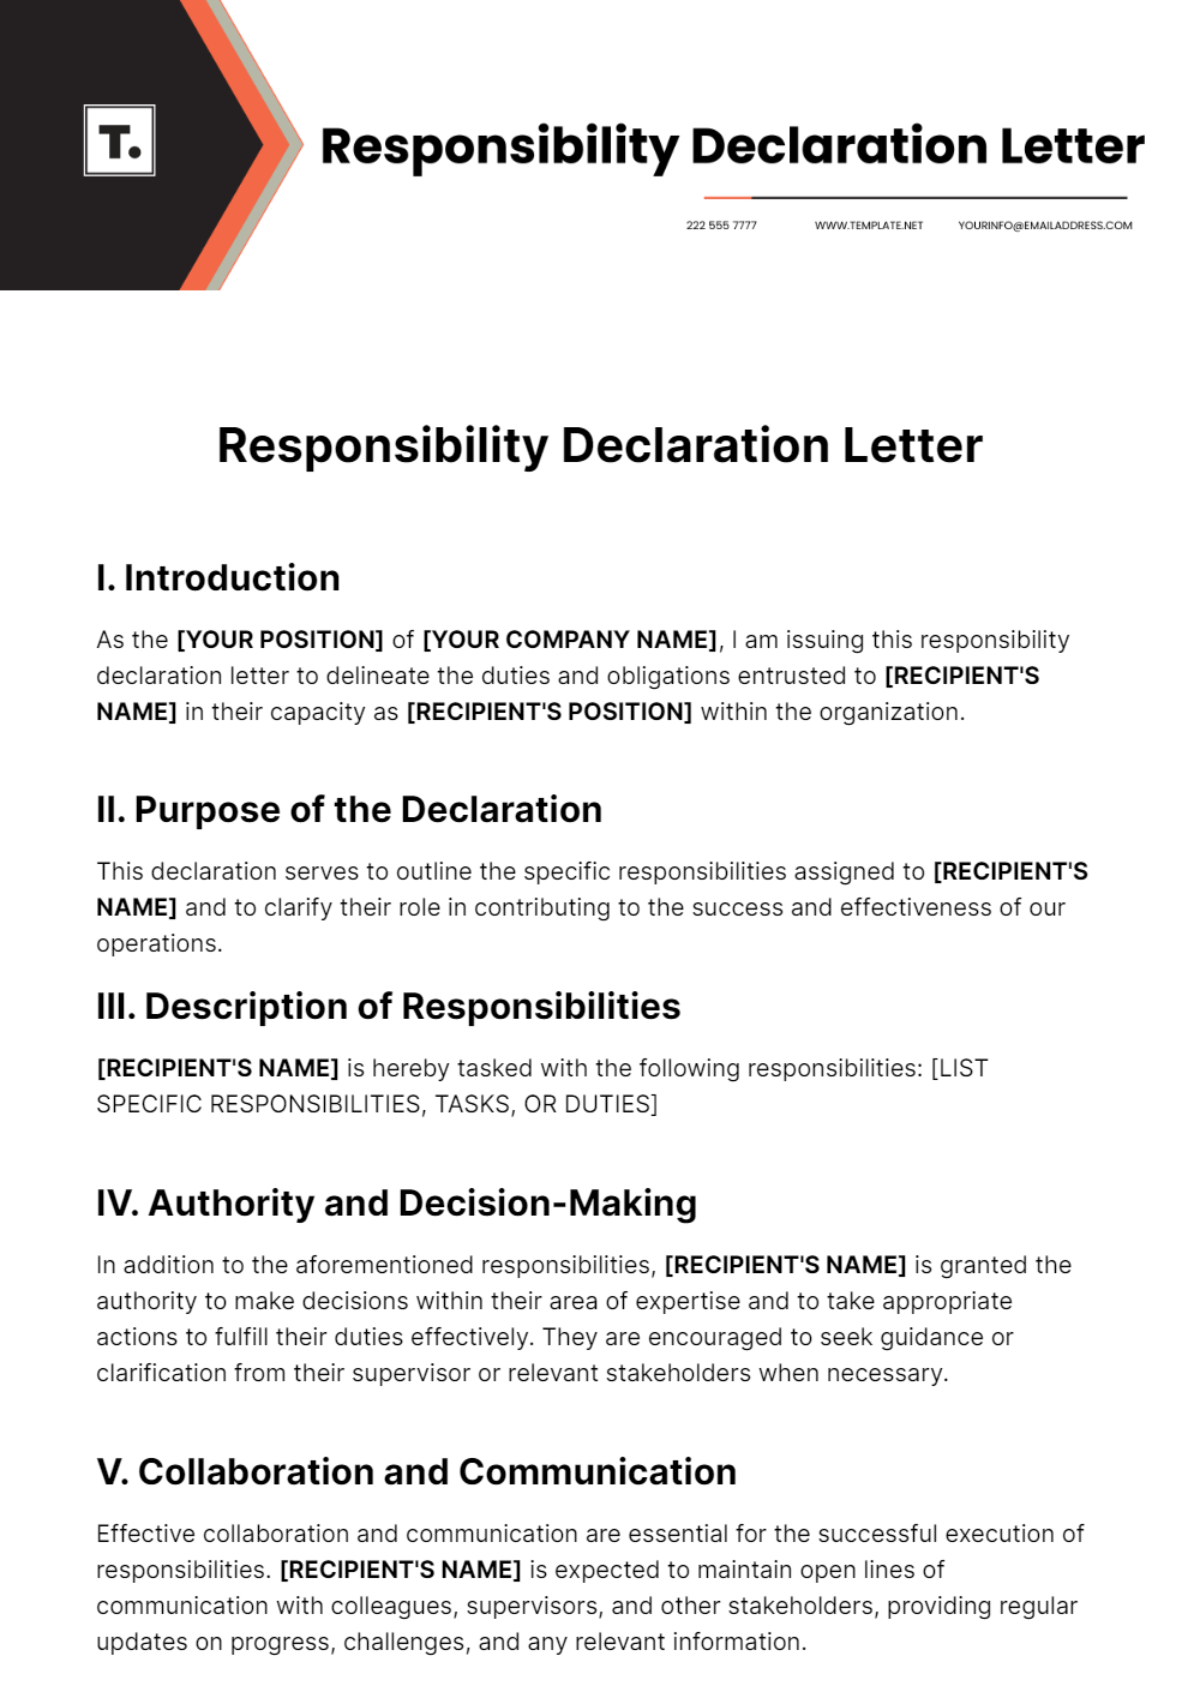 Free Responsibility Declaration Letter Template